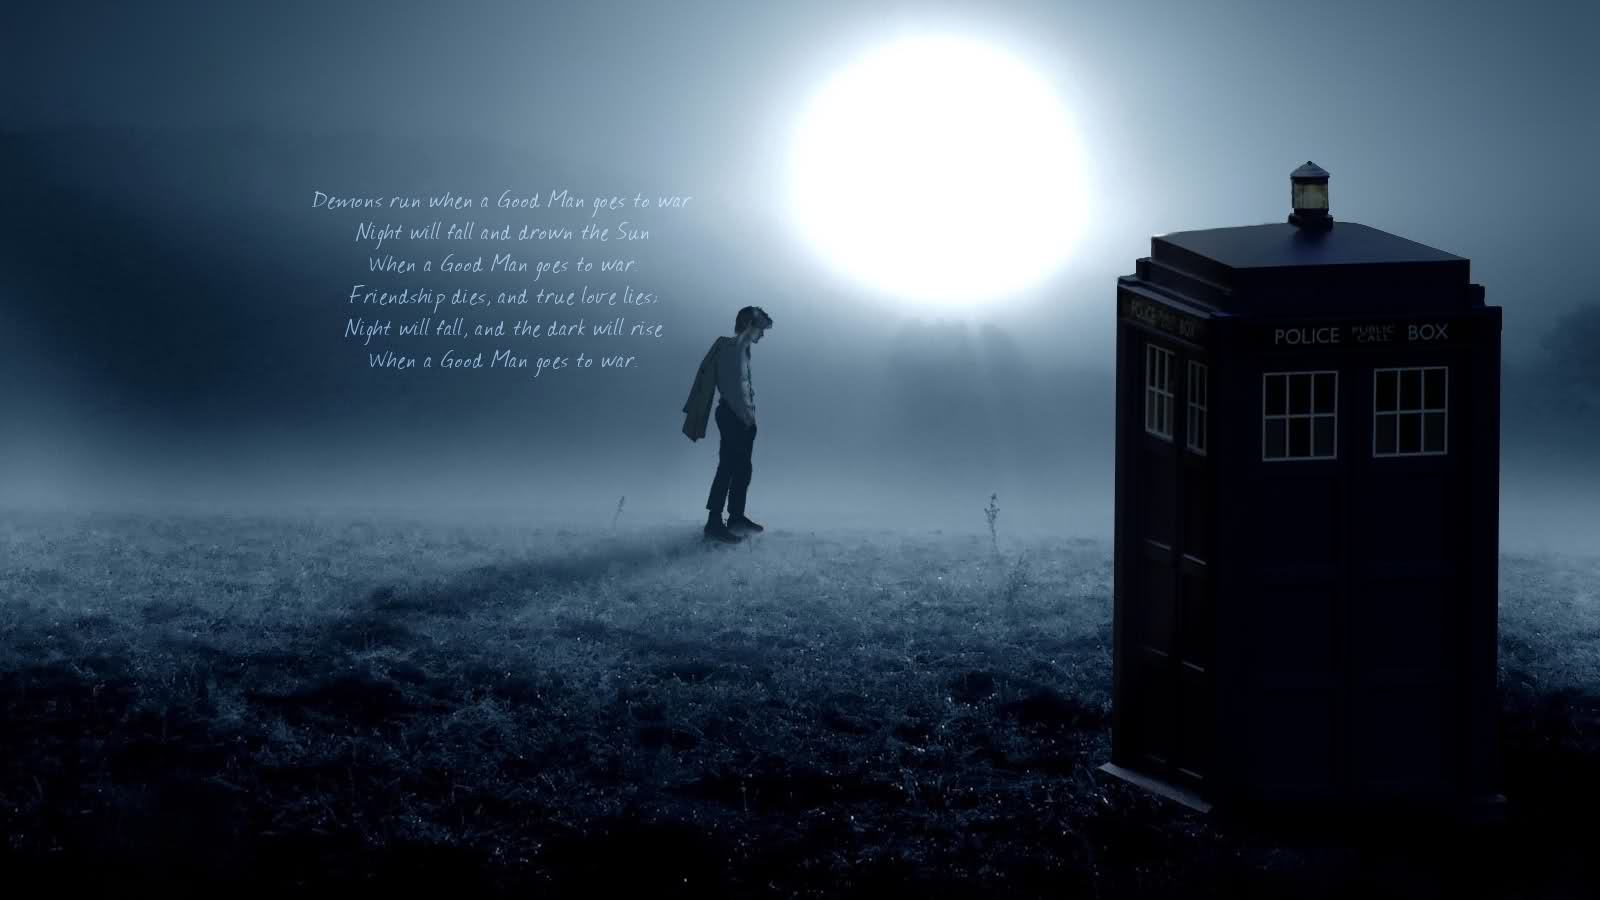 New This Is A Doctor Who Wallpaper I M Very Fond Of